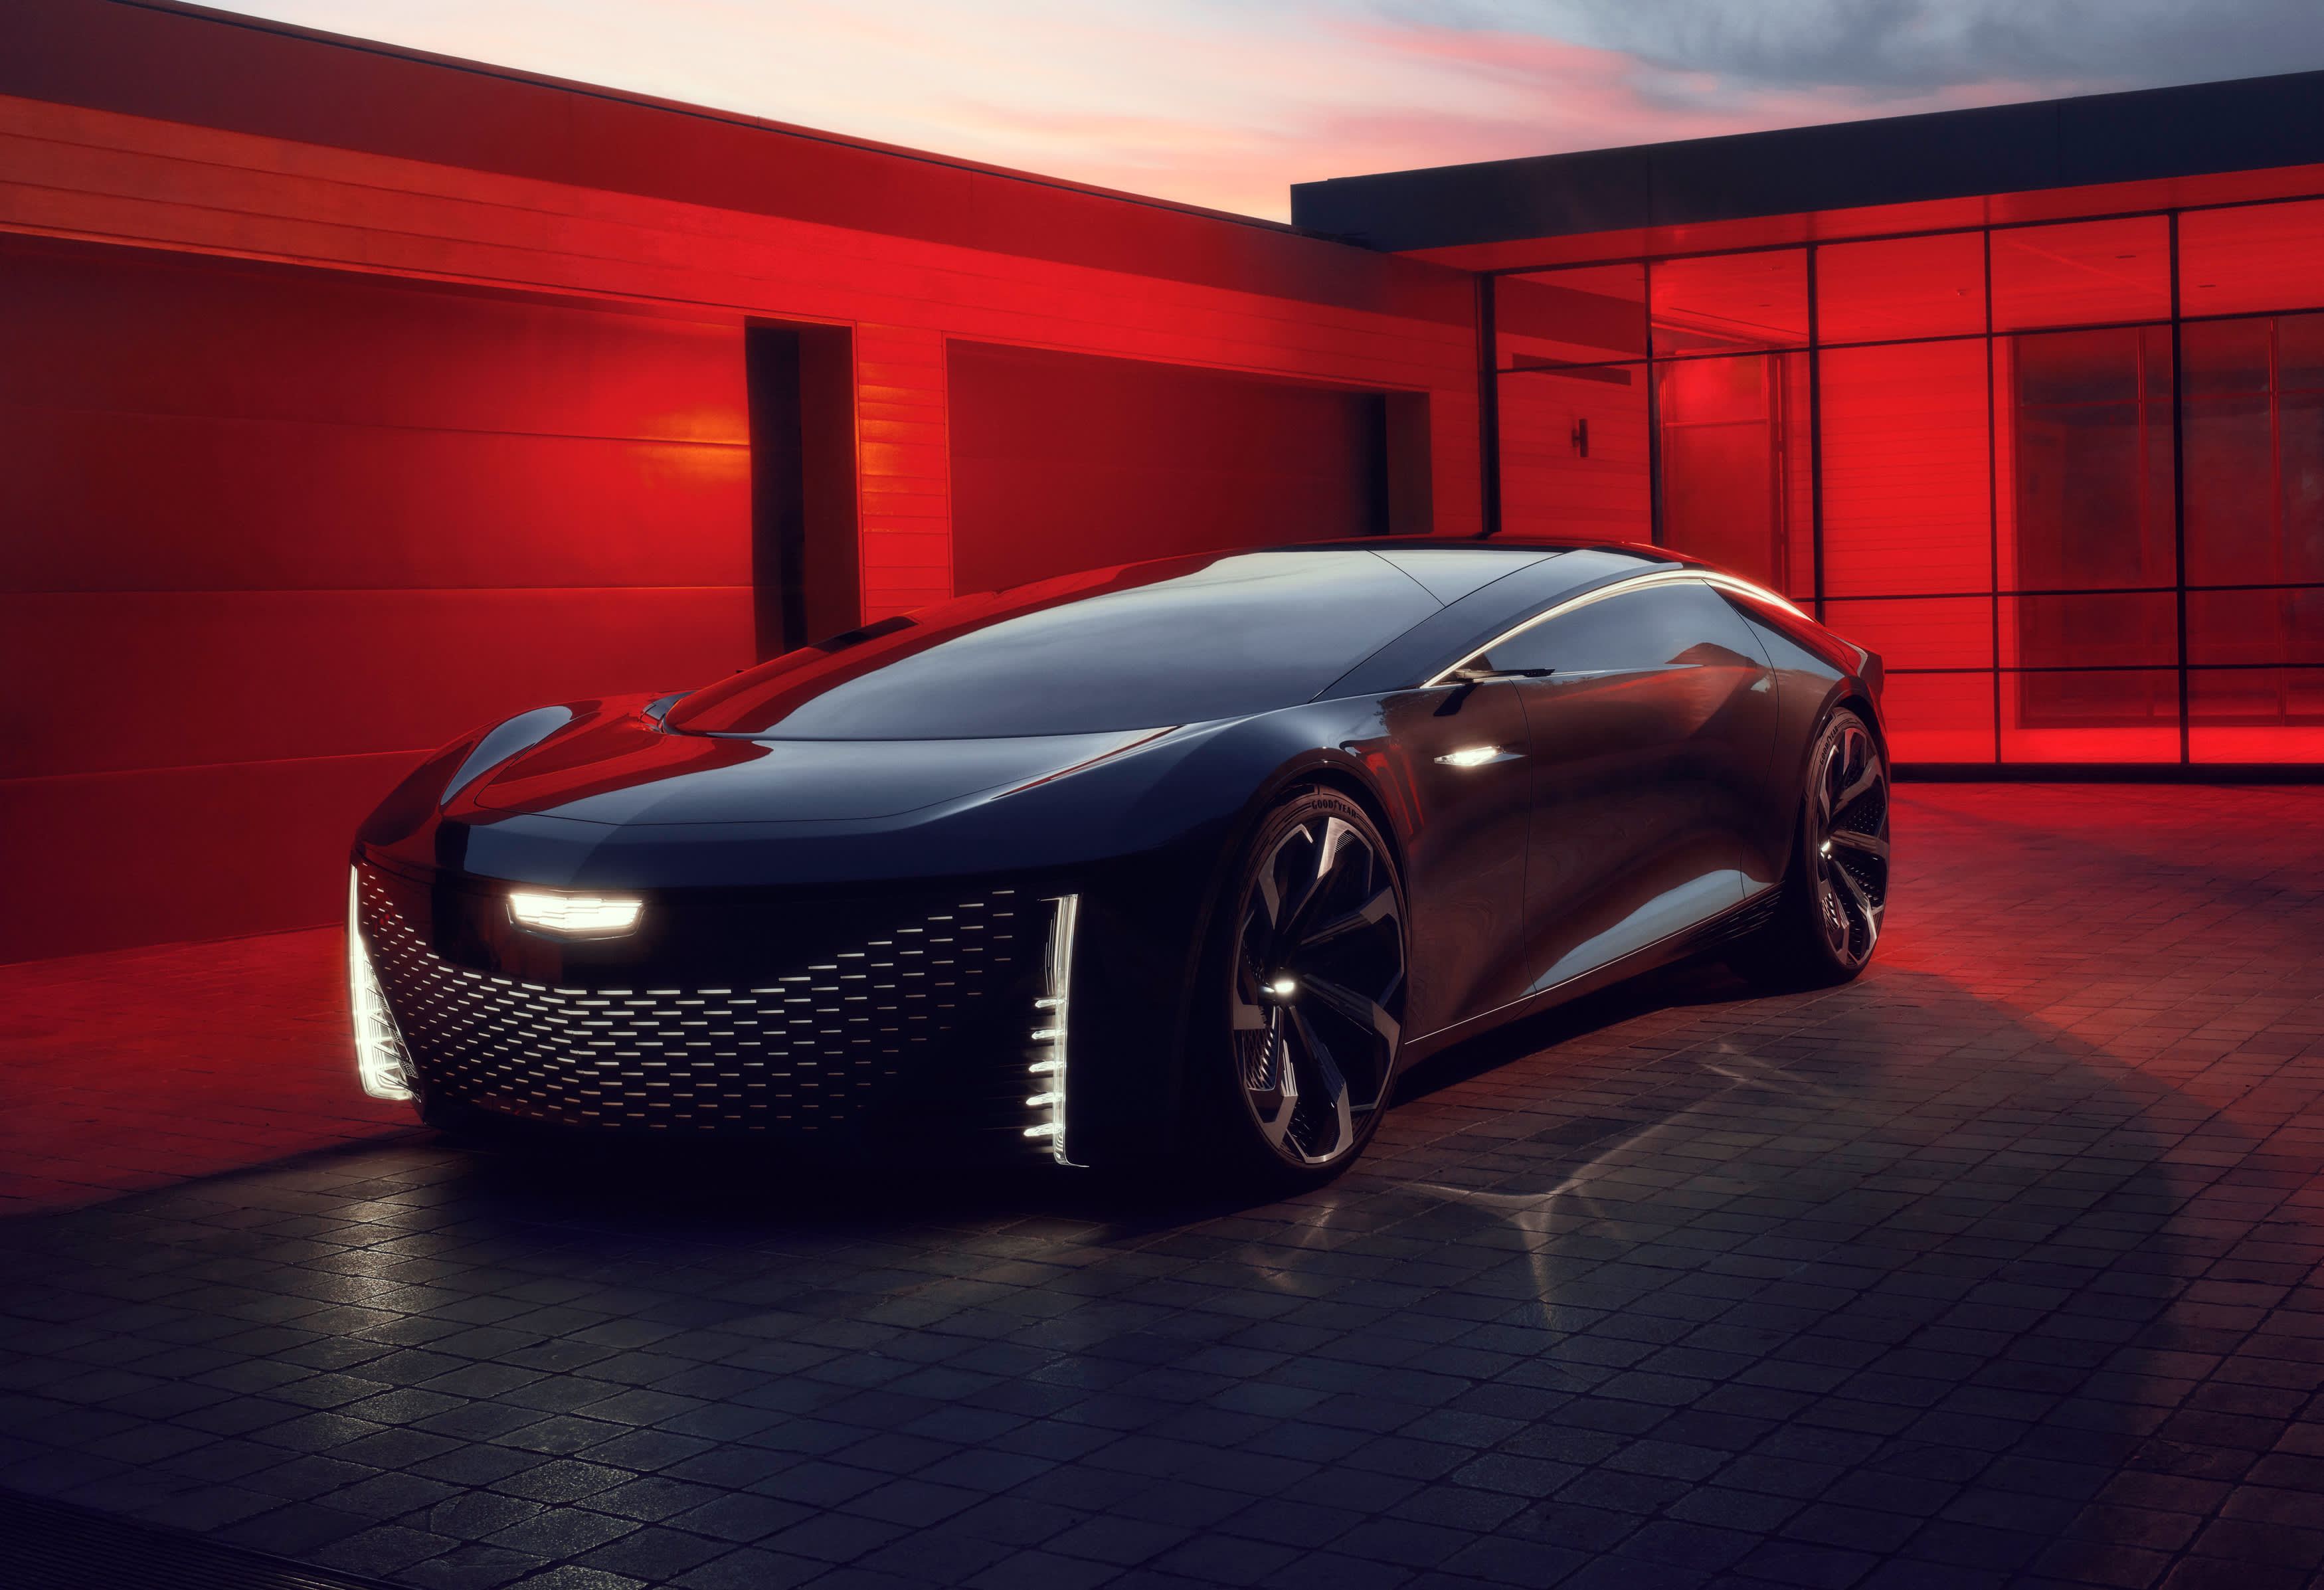 GM CEO Mary Barra unveils new self-driving Cadillac concept vehicle